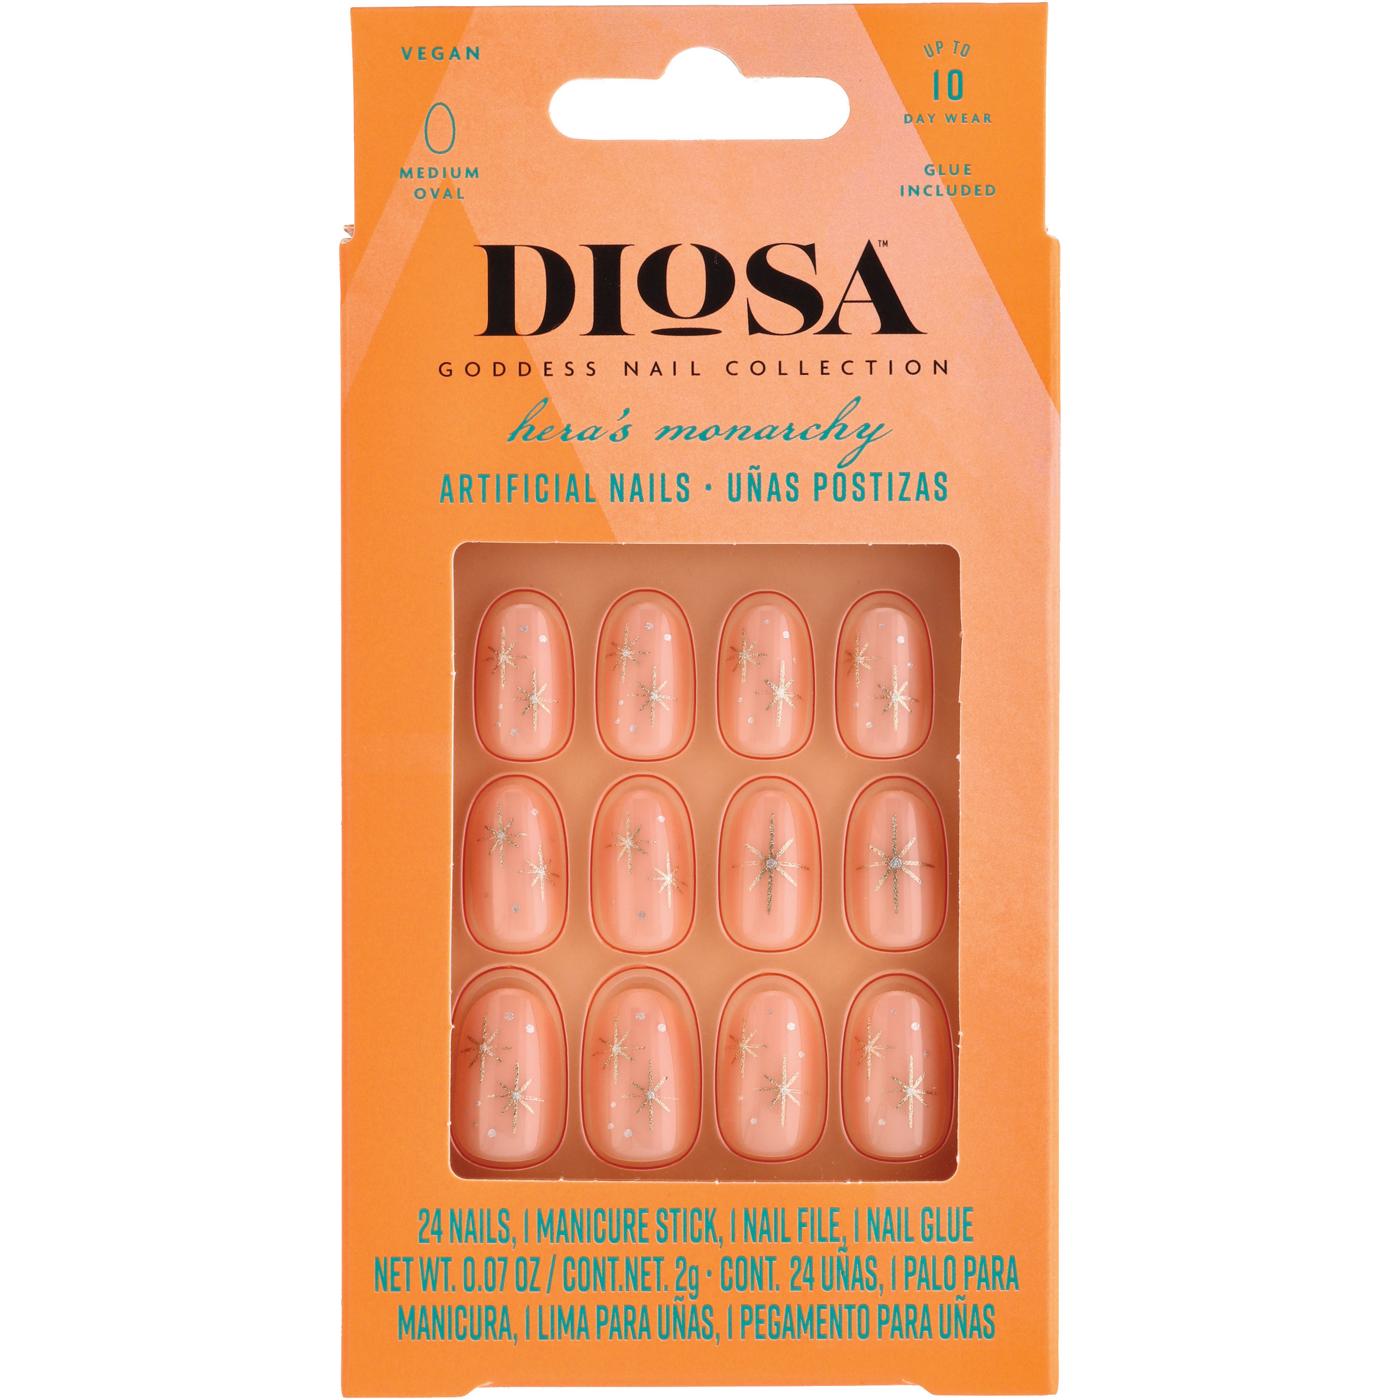 Diosa Hera's Monarchy Artificial Nails; image 1 of 6